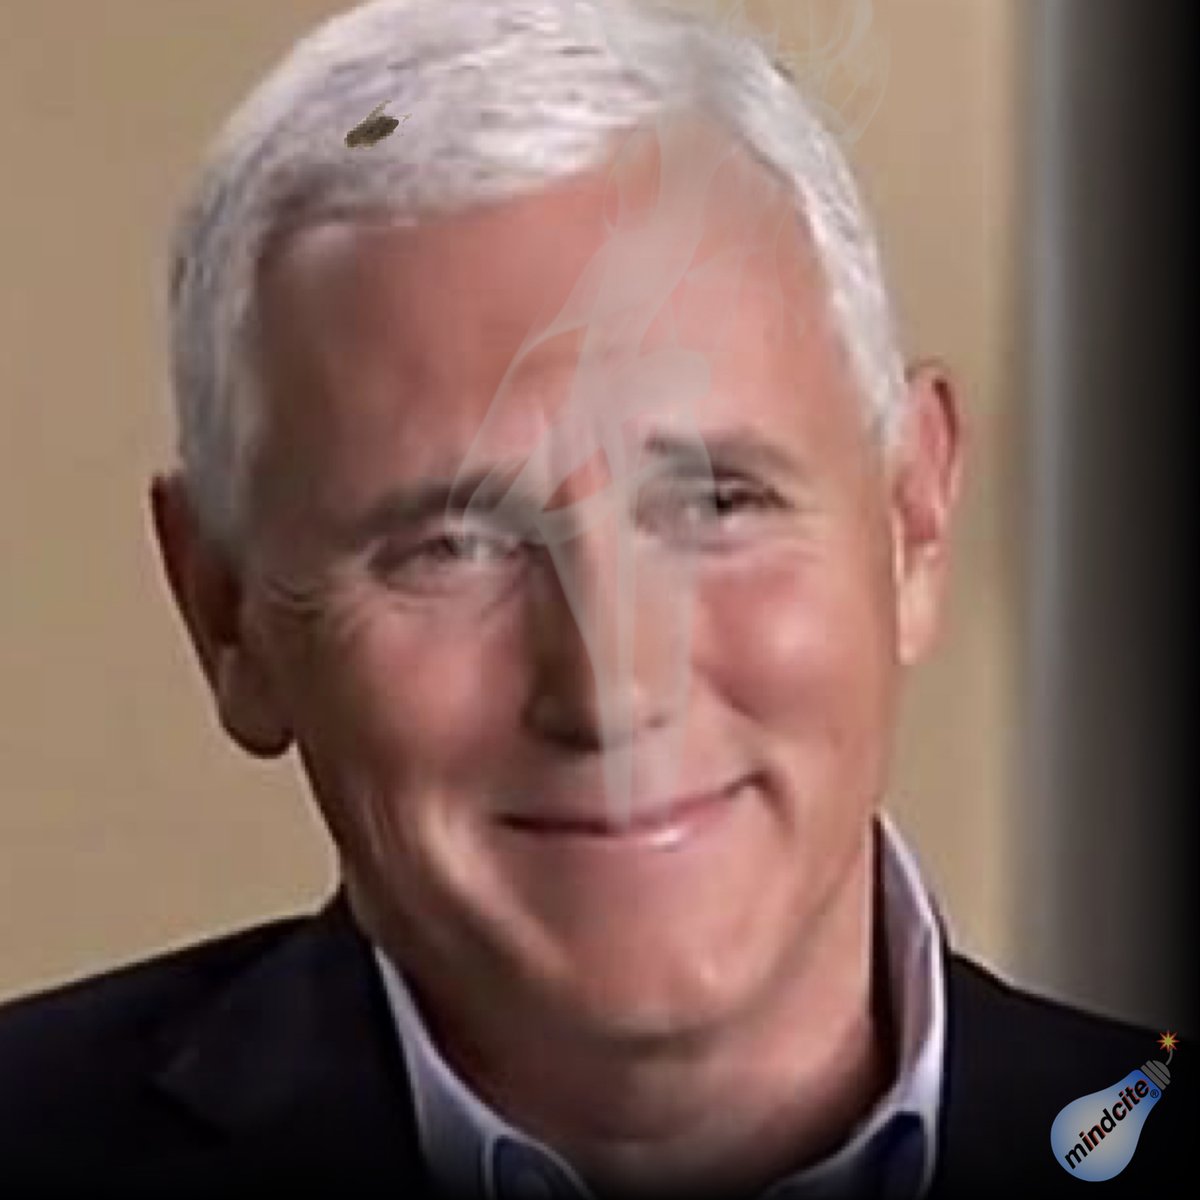 Breaking 420 news: How Pence survived four years all the way up Trump's putrid ass! 😮